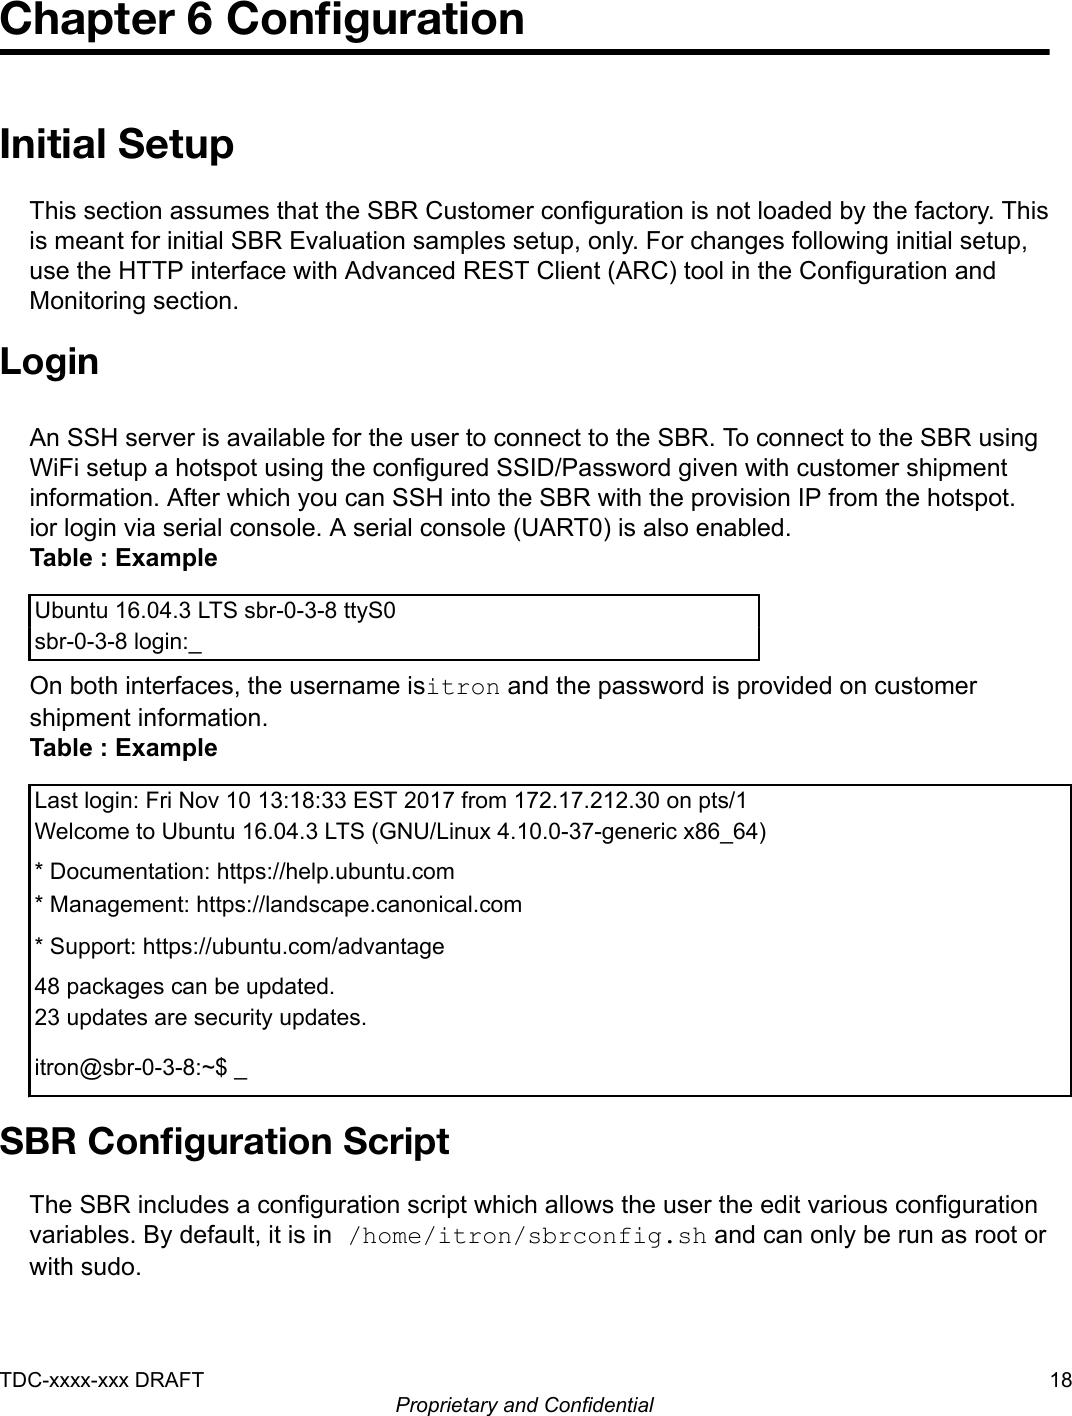 Chapter 6 ConﬁgurationInitial SetupThis section assumes that the SBR Customer configuration is not loaded by the factory. Thisis meant for initial SBR Evaluation samples setup, only. For changes following initial setup,use the HTTP interface with Advanced REST Client (ARC) tool in the Configuration andMonitoring section.LoginAn SSH server is available for the user to connect to the SBR. To connect to the SBR usingWiFi setup a hotspot using the configured SSID/Password given with customer shipmentinformation. After which you can SSH into the SBR with the provision IP from the hotspot.ior login via serial console. A serial console (UART0) is also enabled.Table : ExampleUbuntu 16.04.3 LTS sbr-0-3-8 ttyS0sbr-0-3-8 login:_On both interfaces, the username isitron and the password is provided on customershipment information.Table : ExampleLast login: Fri Nov 10 13:18:33 EST 2017 from 172.17.212.30 on pts/1Welcome to Ubuntu 16.04.3 LTS (GNU/Linux 4.10.0-37-generic x86_64)* Documentation: https://help.ubuntu.com* Management: https://landscape.canonical.com* Support: https://ubuntu.com/advantage48 packages can be updated.23 updates are security updates.itron@sbr-0-3-8:~$ _SBR Conﬁguration ScriptThe SBR includes a configuration script which allows the user the edit various configurationvariables. By default, it is in /home/itron/sbrconfig.sh and can only be run as root orwith sudo.TDC-xxxx-xxx DRAFT 18Proprietary and Confidential